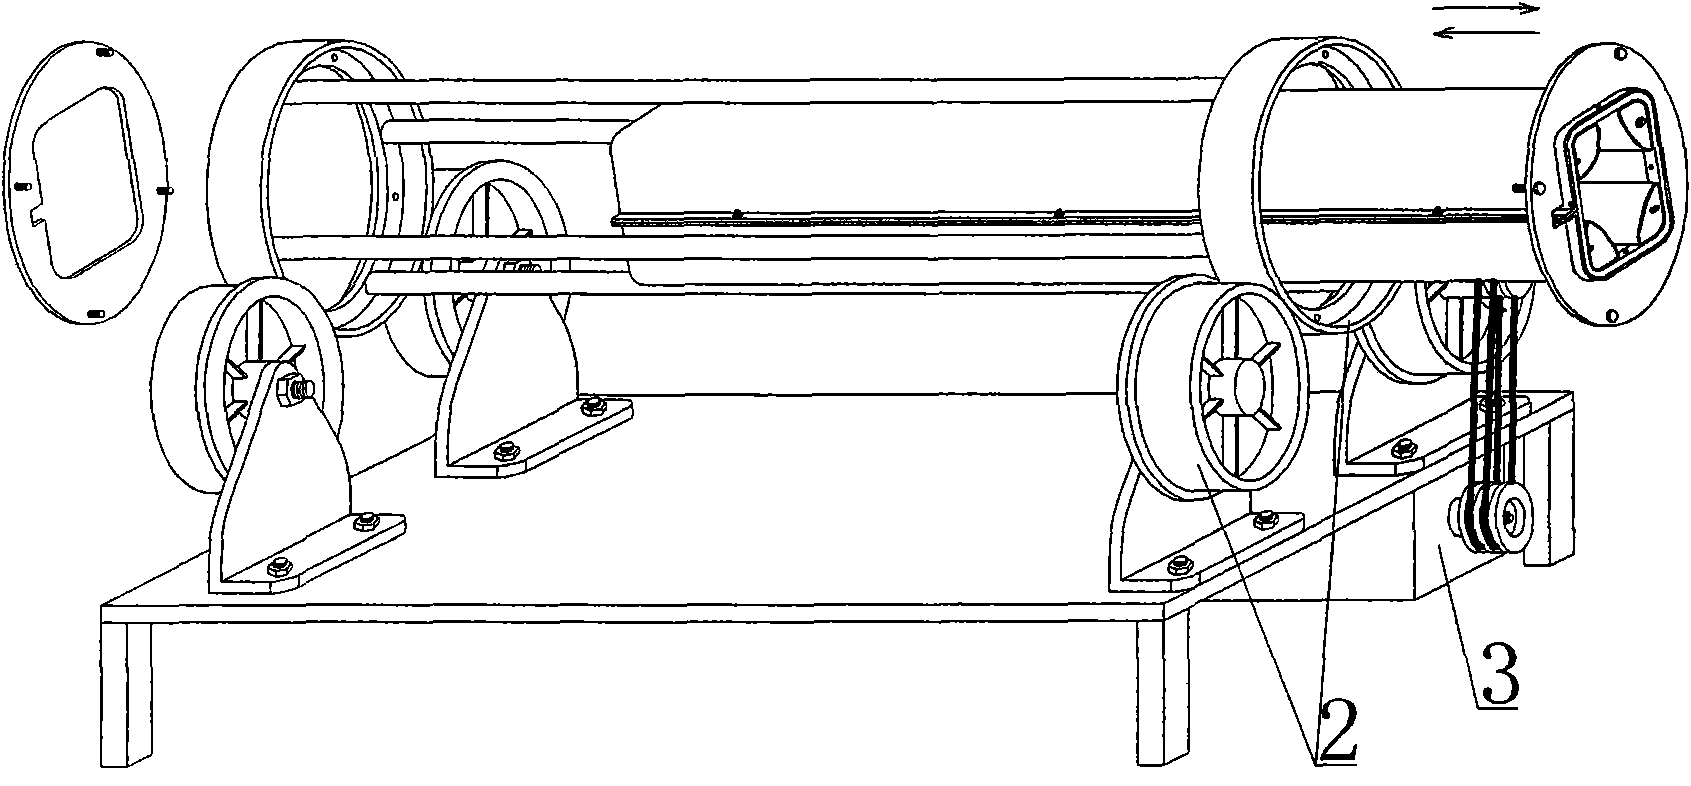 Centrifugal forming tool